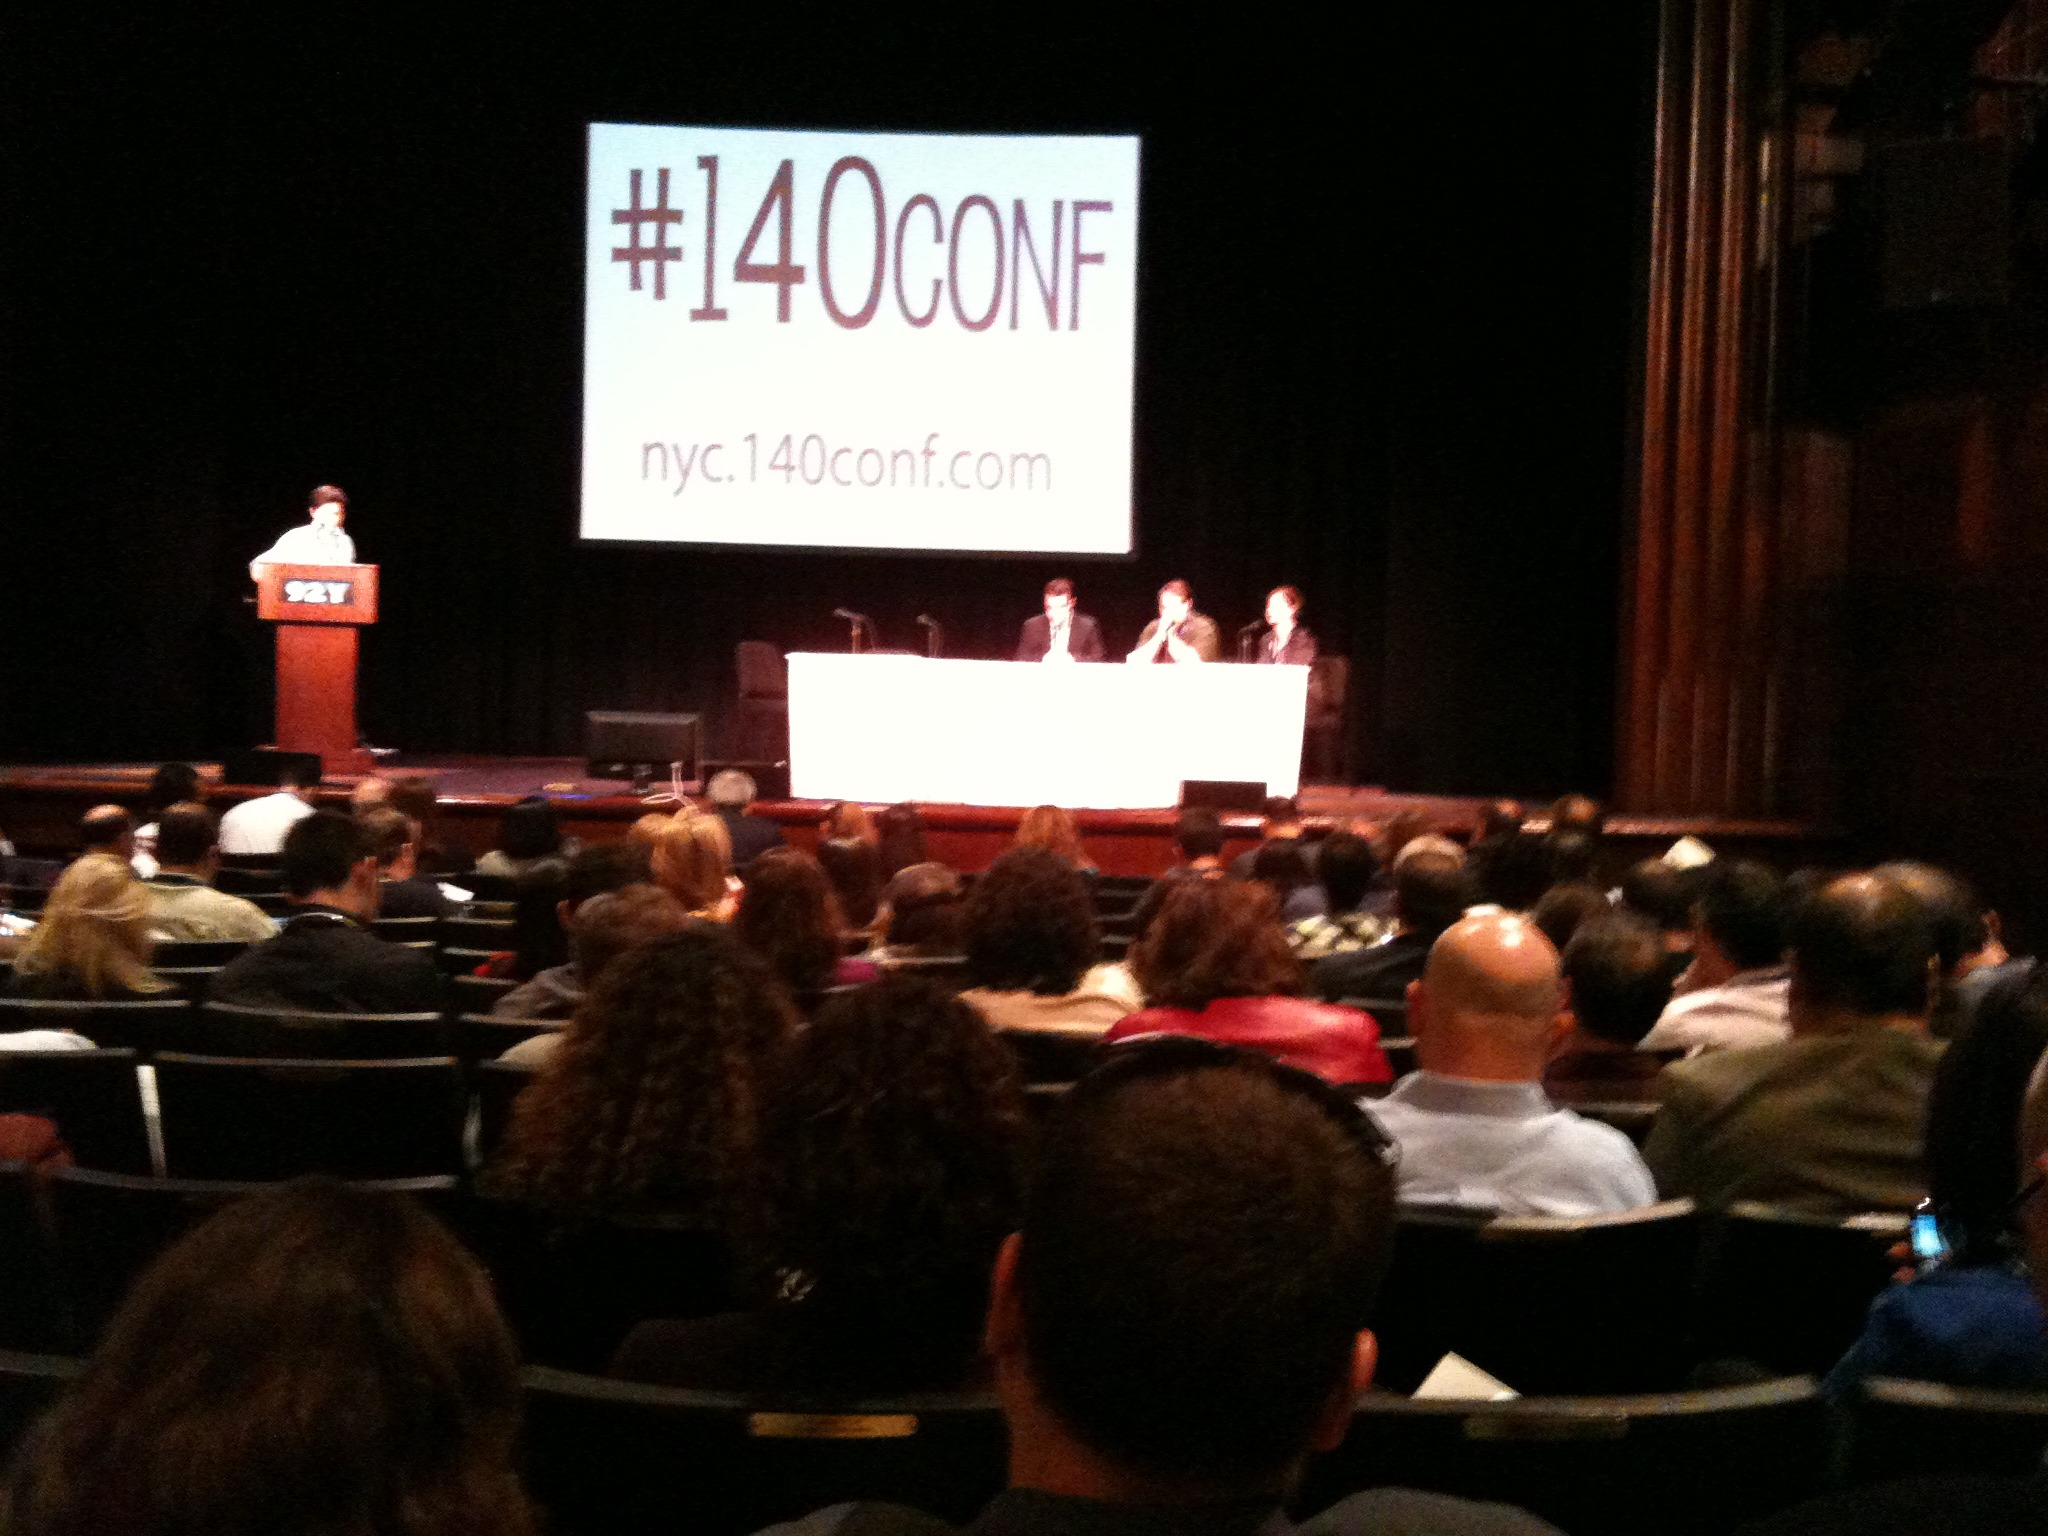 On Stage at #140conf in NYC